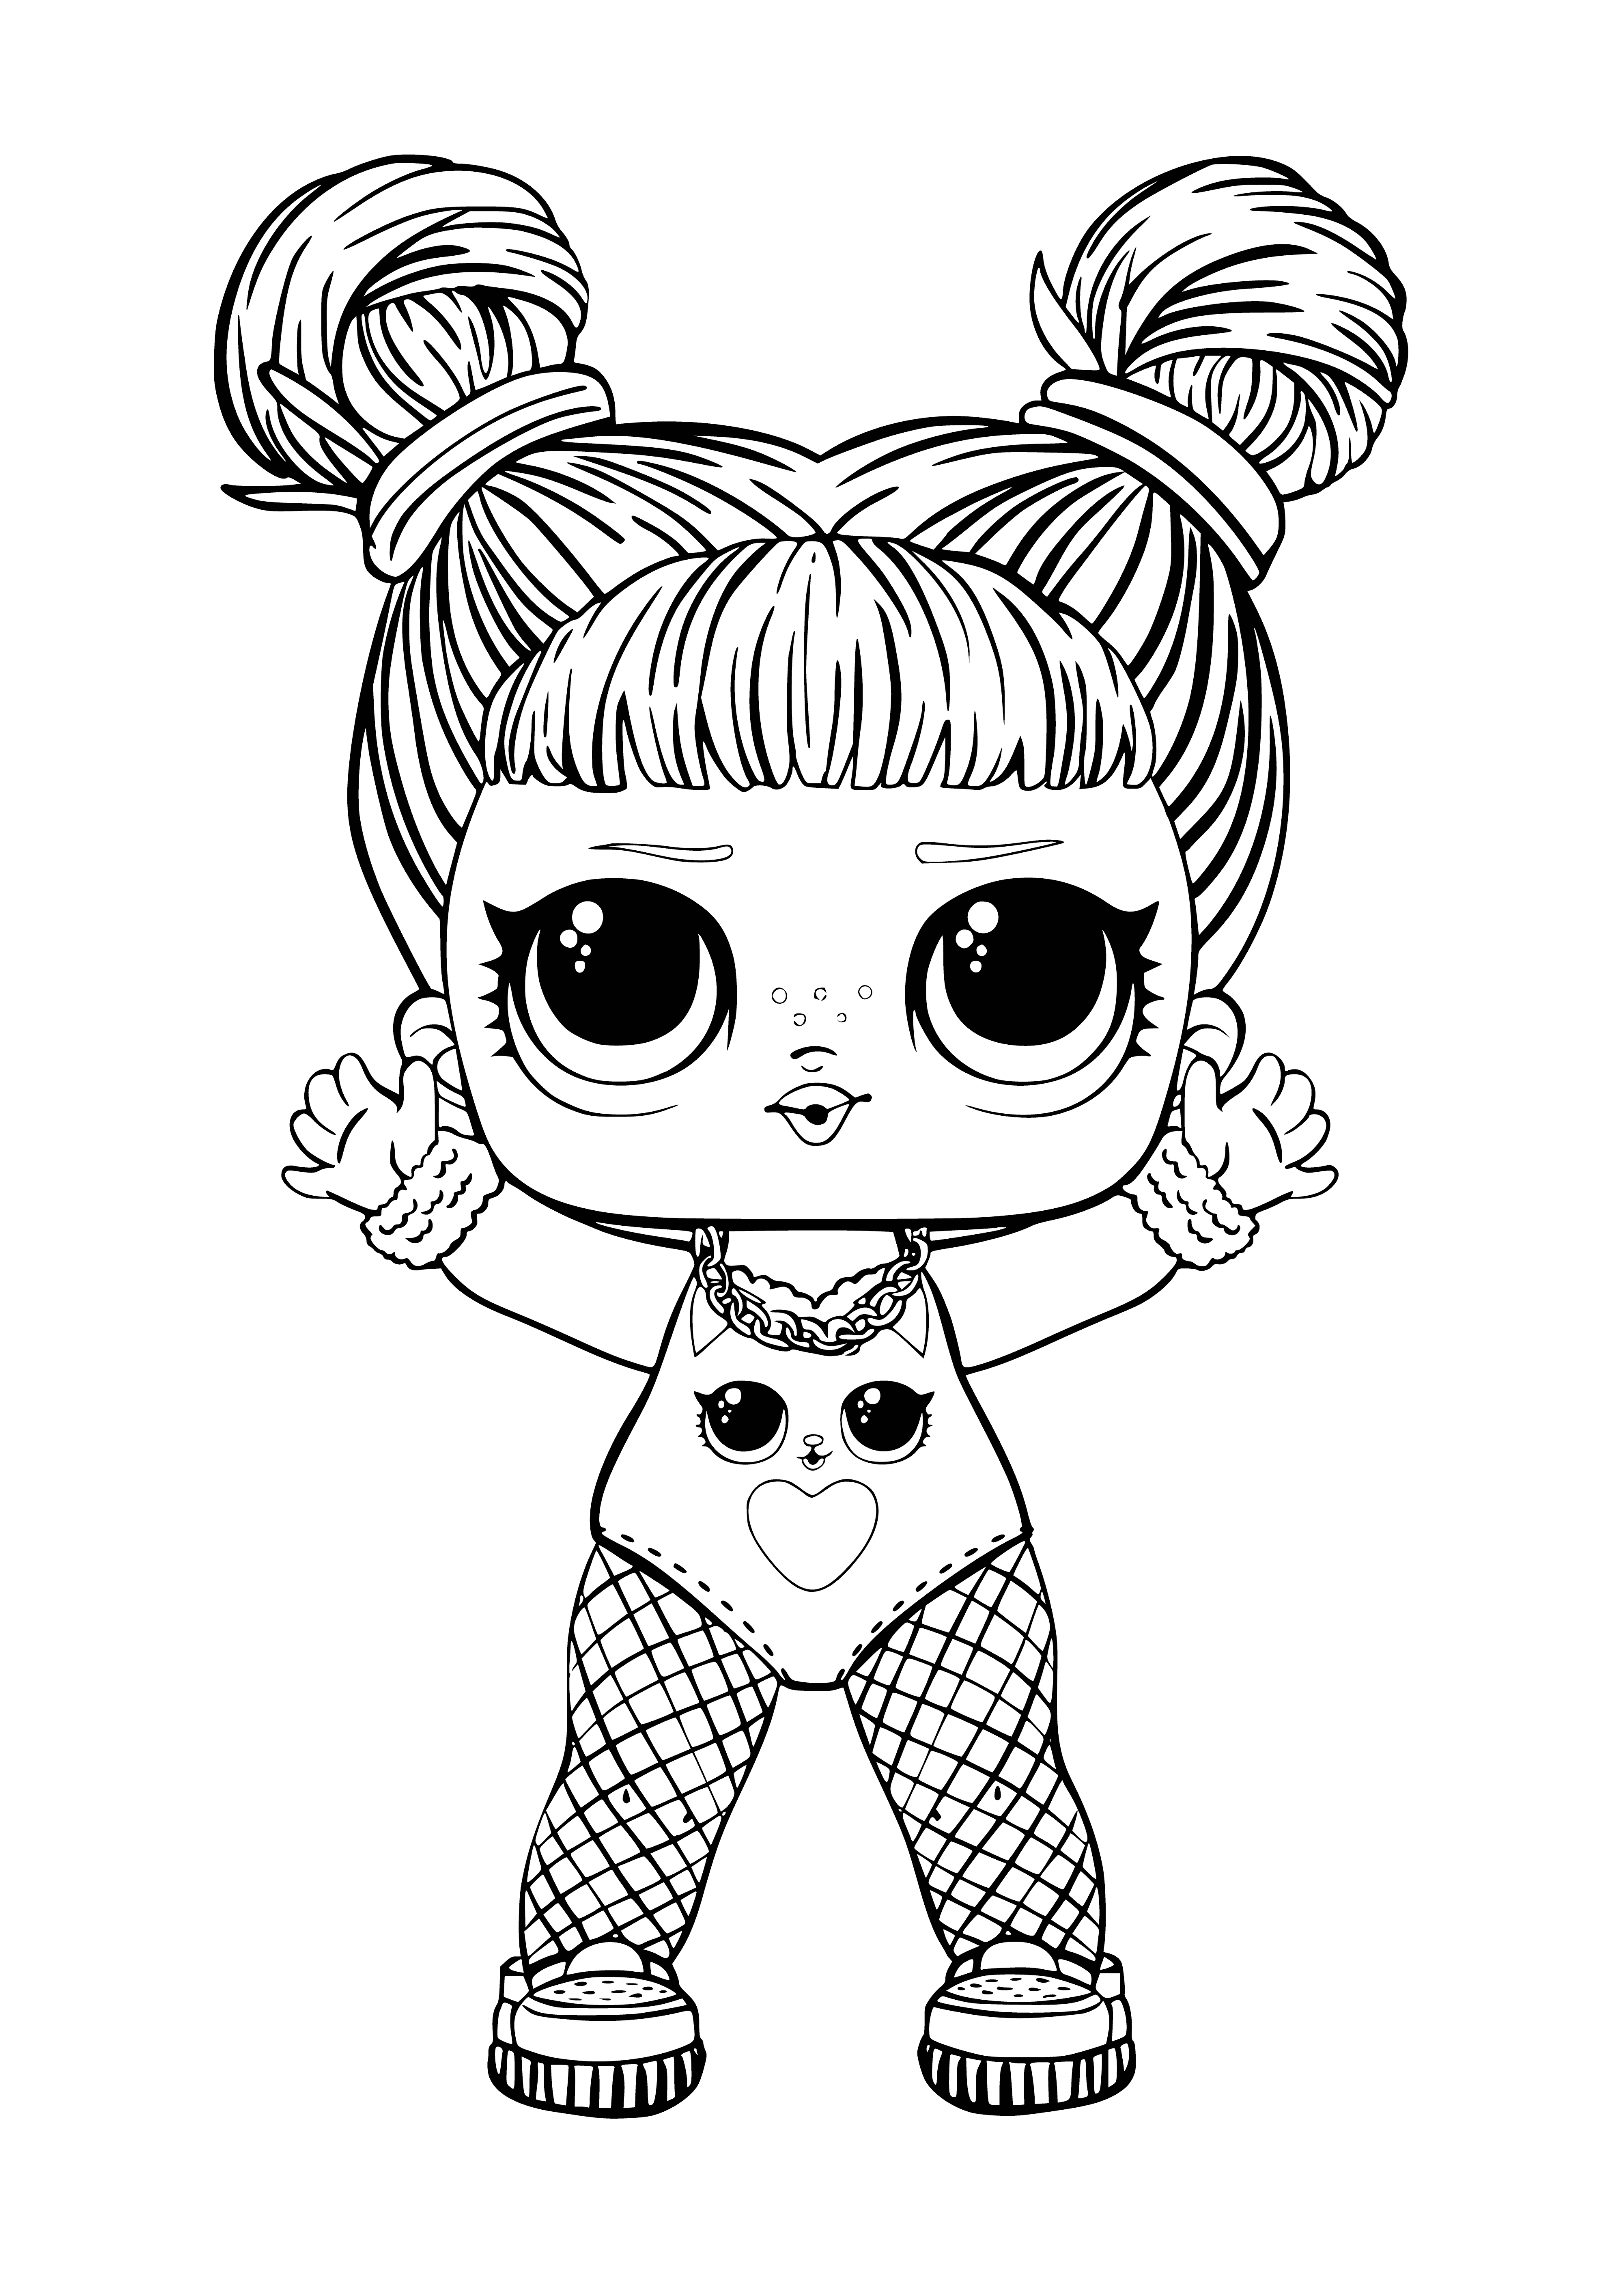 coloring page: Girl with long brown hair wearing black & white outfit poses in front of white background. #selfcare #girlpower